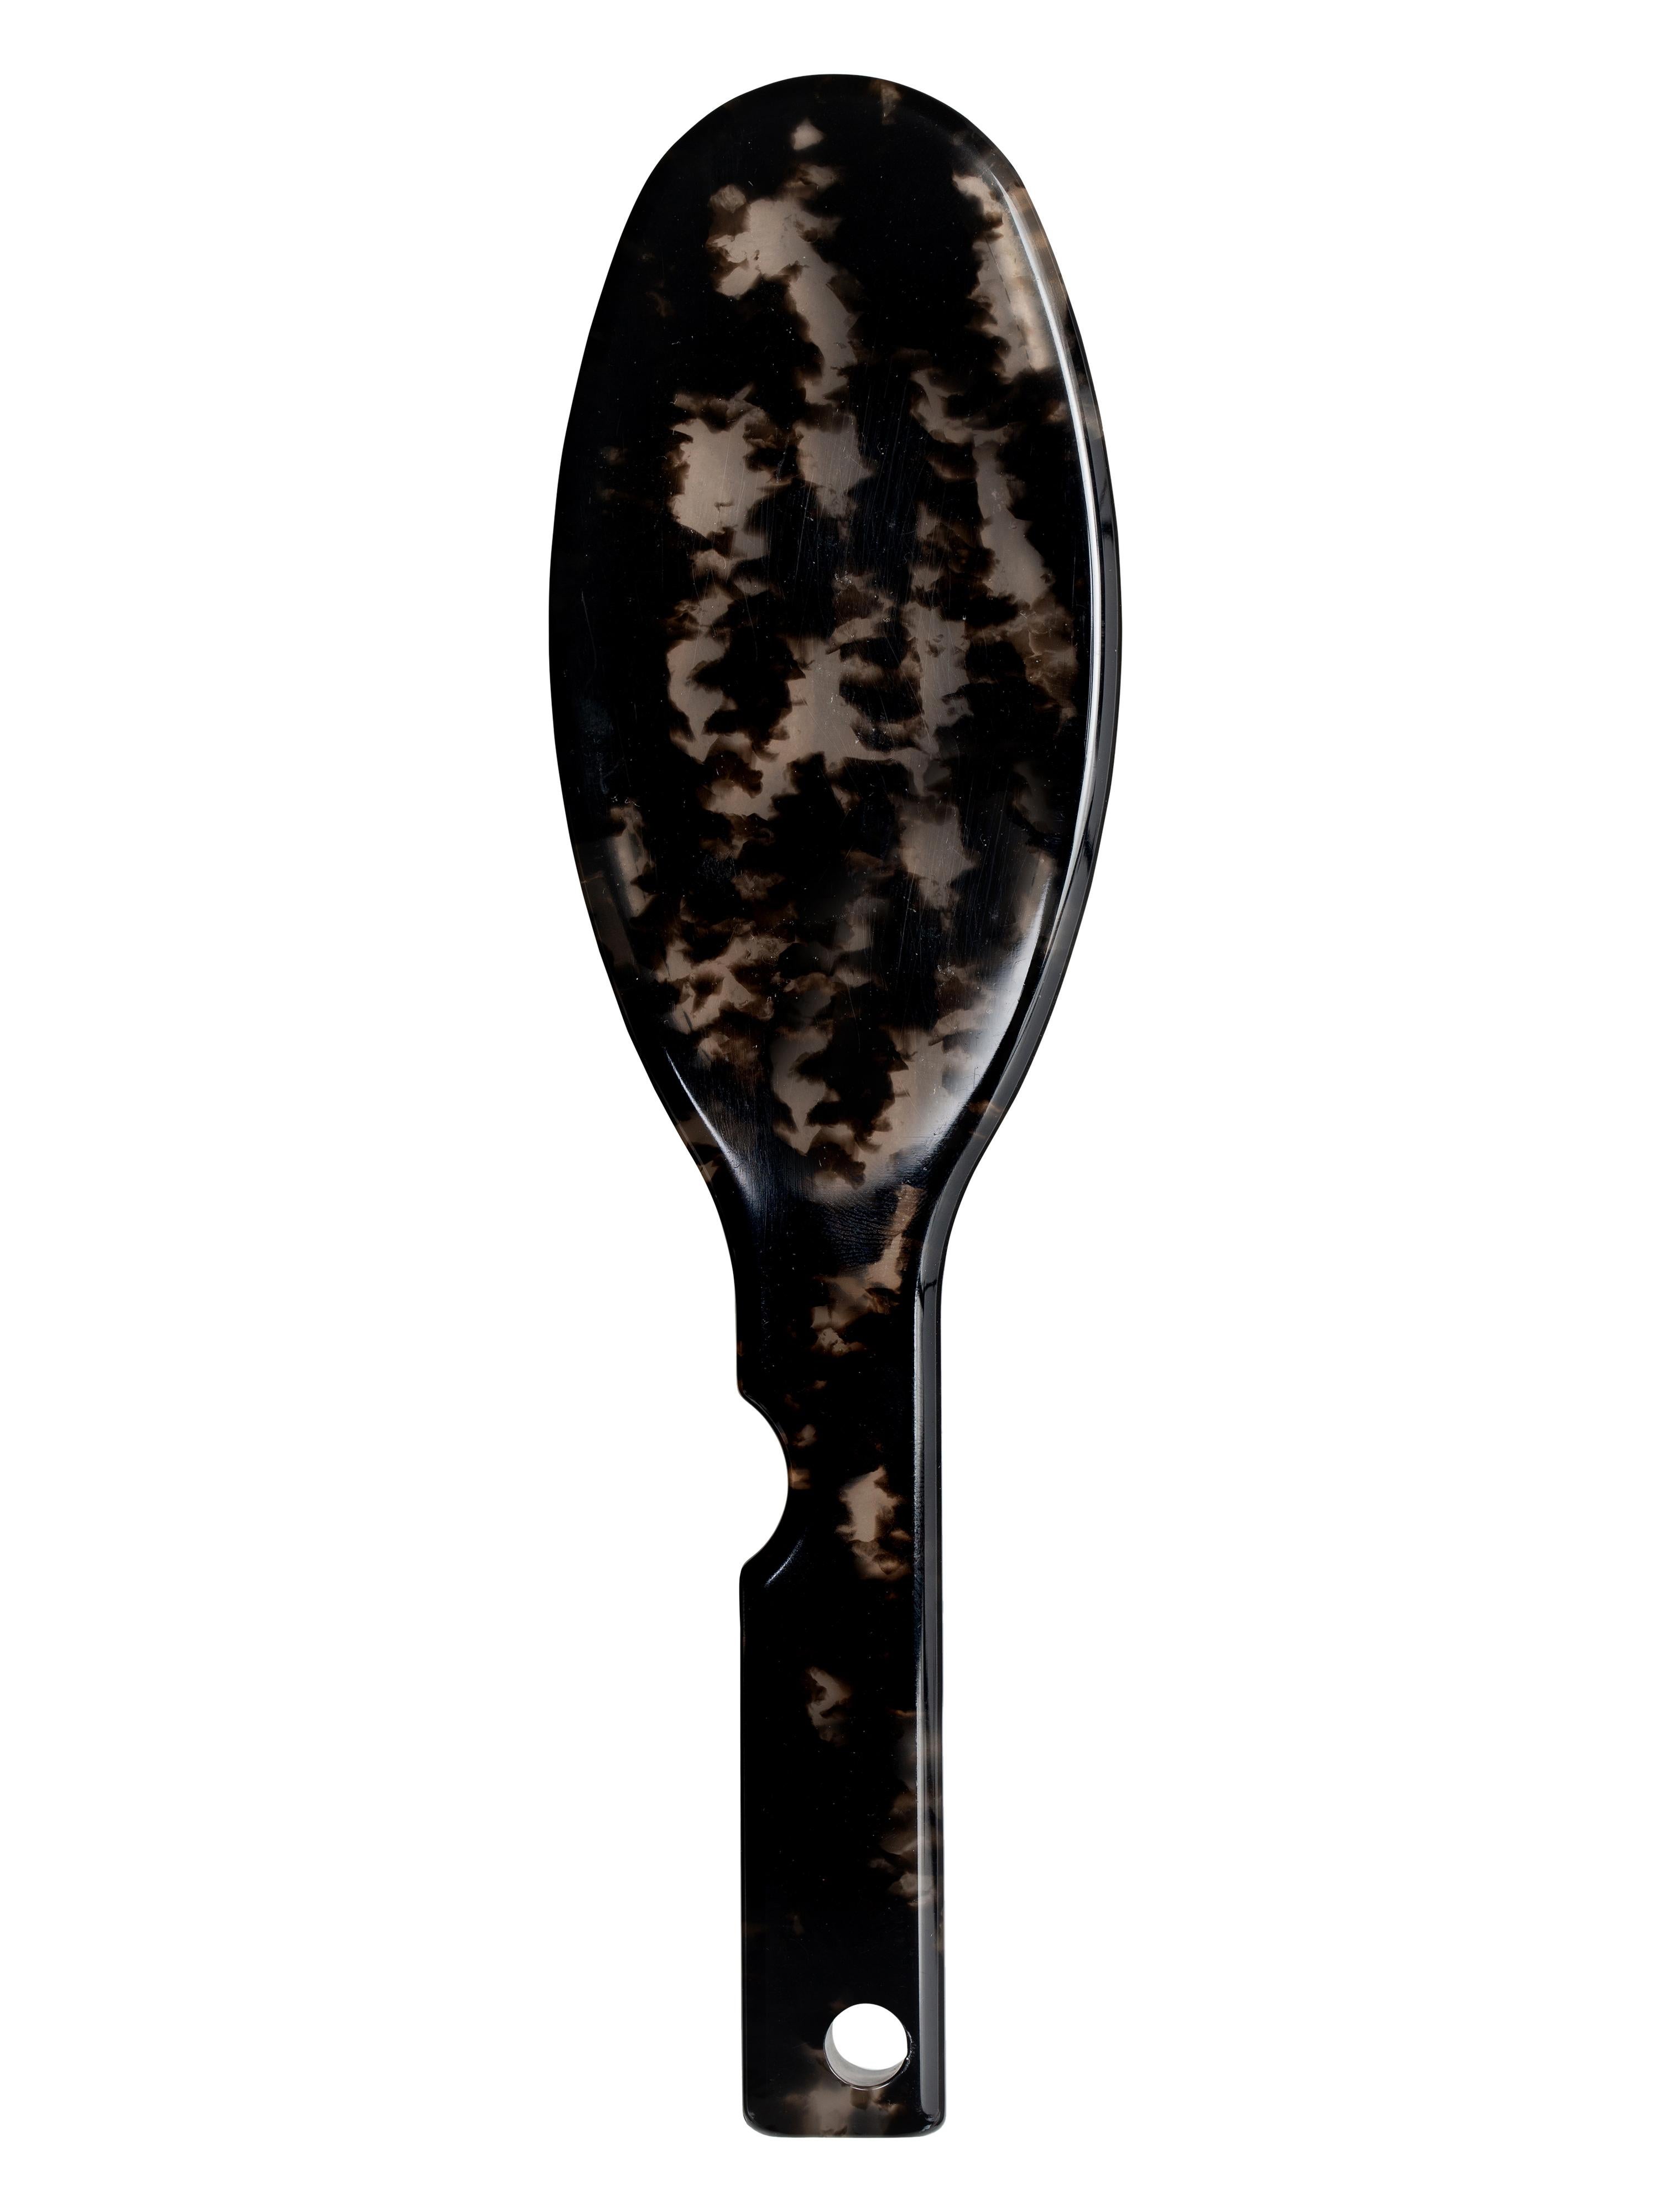 Hair Brush in Havana black and brown marble acetate with cylindrical gold metal pins. Handle is holed with man swimming logo gold impressed
By Virgil Abloh
Dimensions: 5.6 W x 20.1 H
This item is only available to be purchased and shipped to the